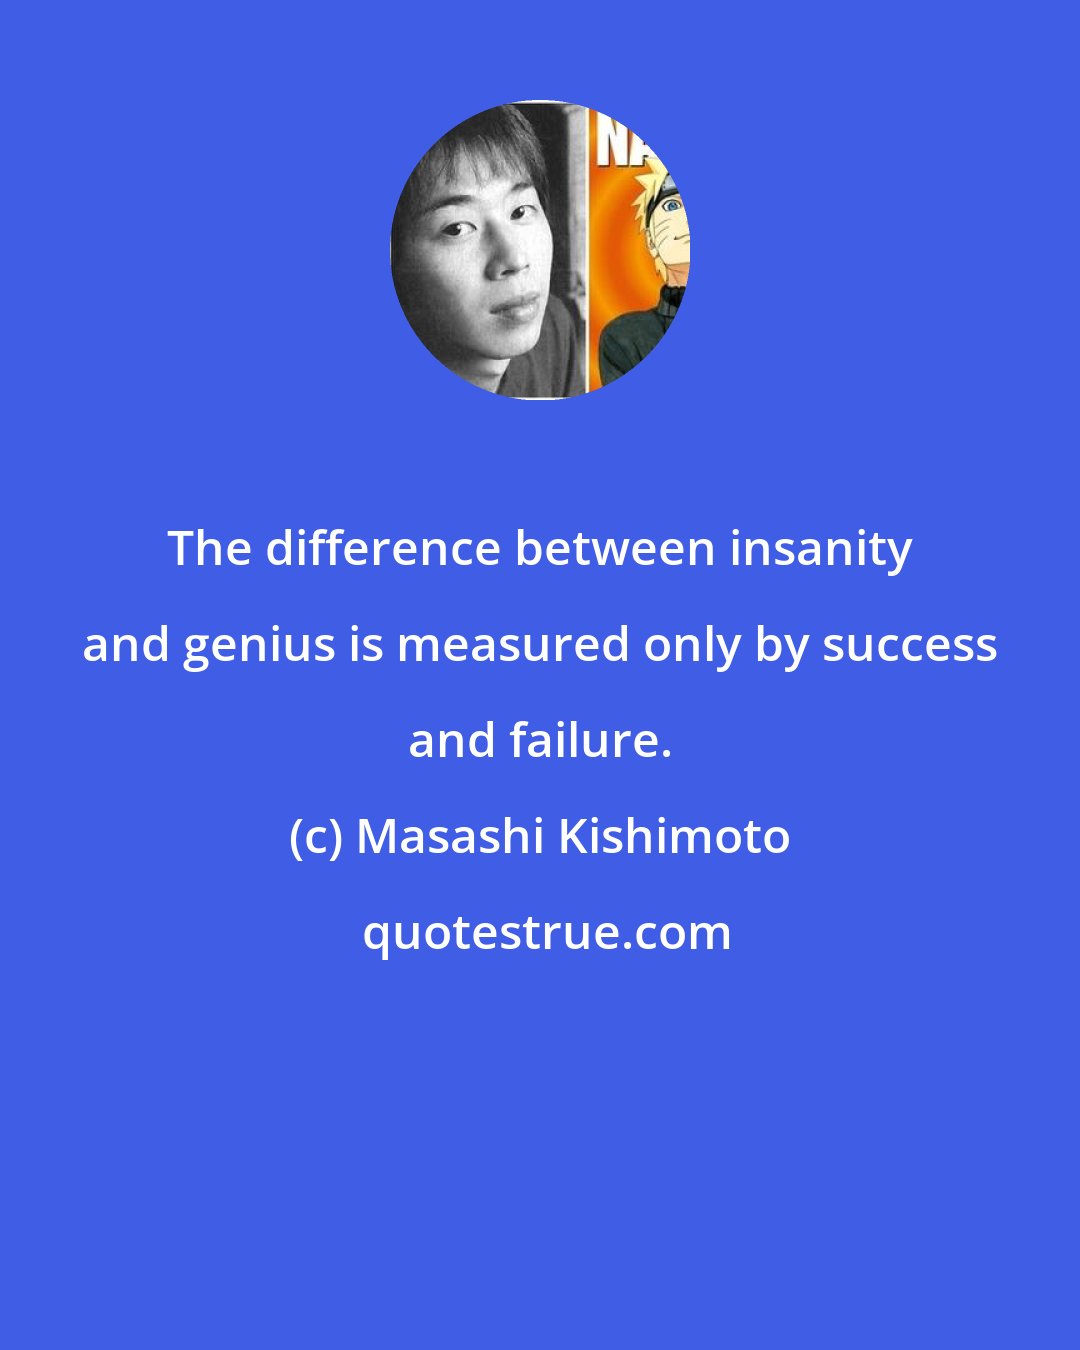 Masashi Kishimoto: The difference between insanity and genius is measured only by success and failure.